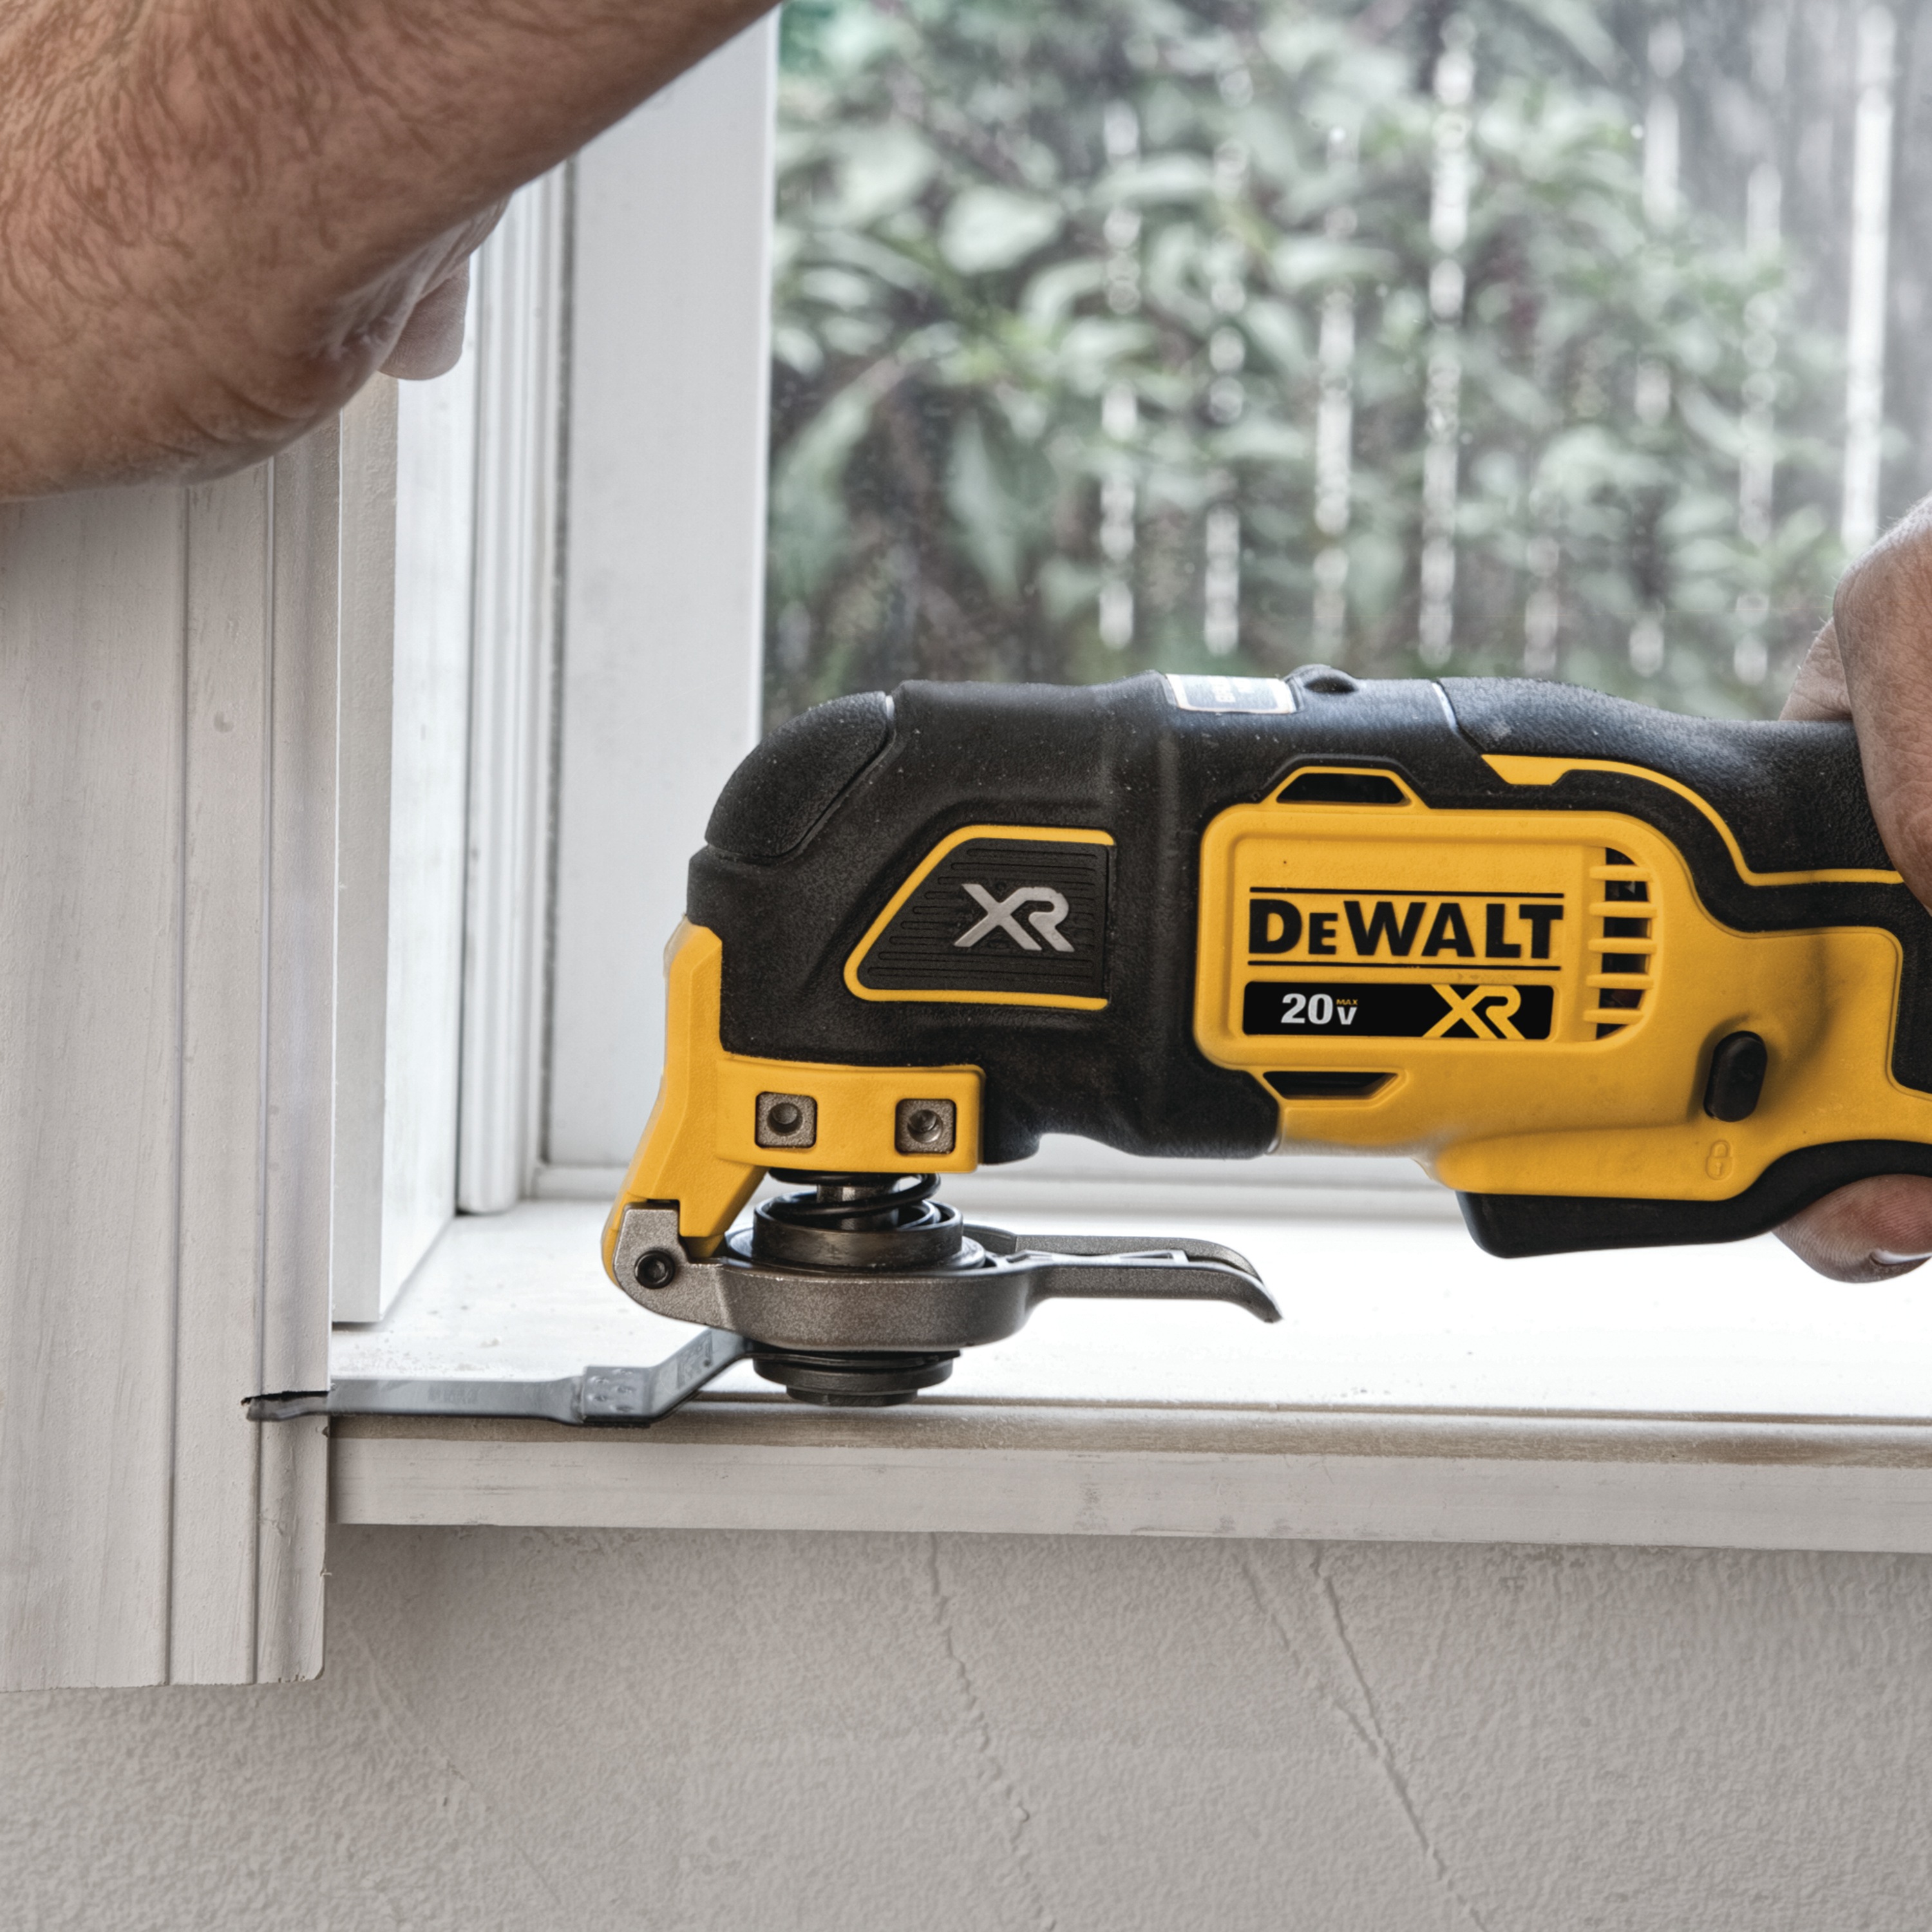 XR Cordless Oscillating Multi Tool being used by person to trim a wooden window frame 